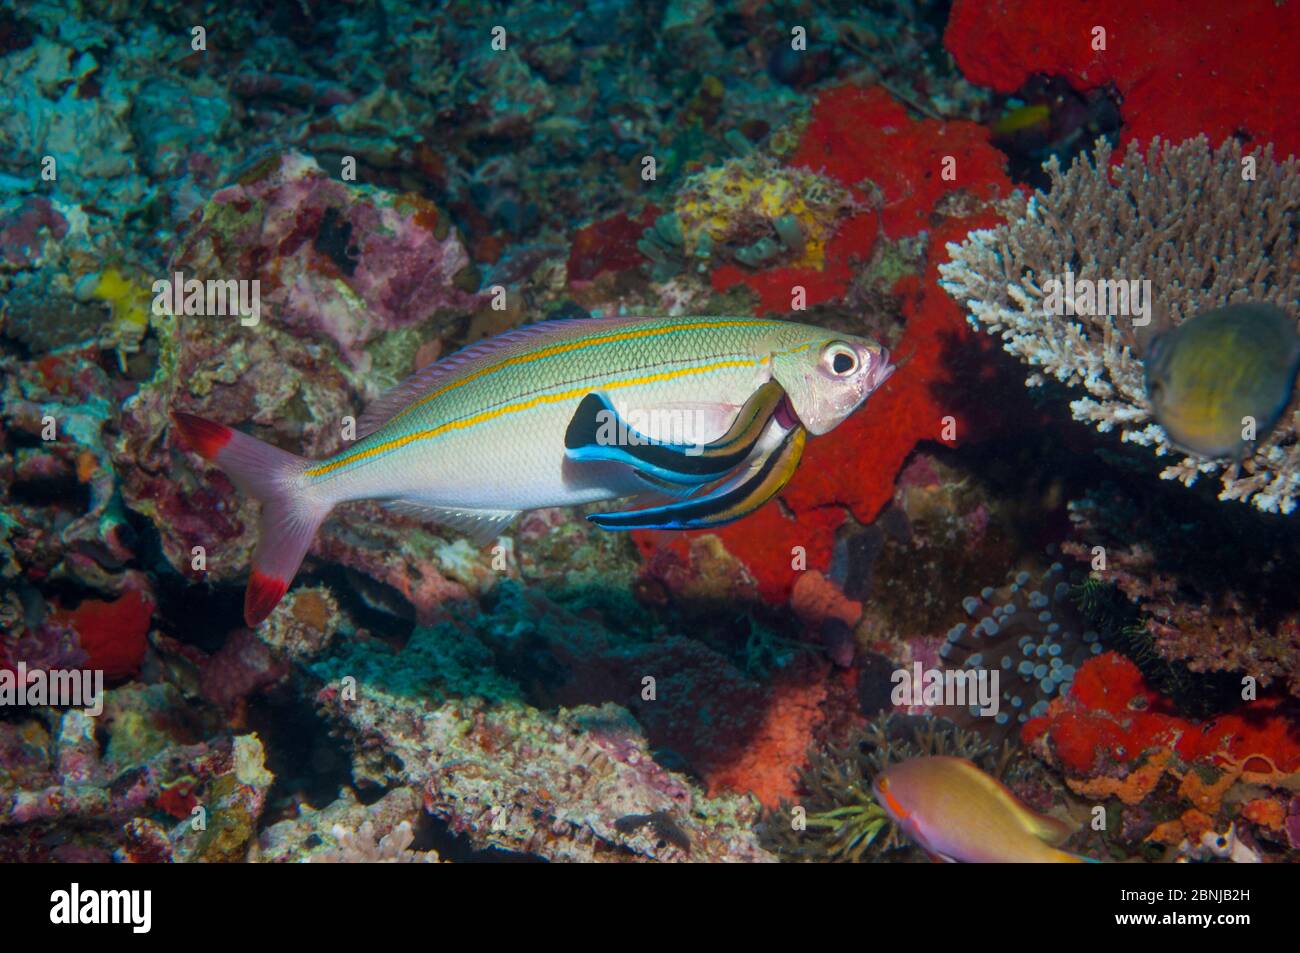 Doublelined fusilier (Pterocaesio digramma) with two Cleaner wrasses (Lutjanus dimidiata) inside its gill, West Papua, Indonesia. Stock Photo